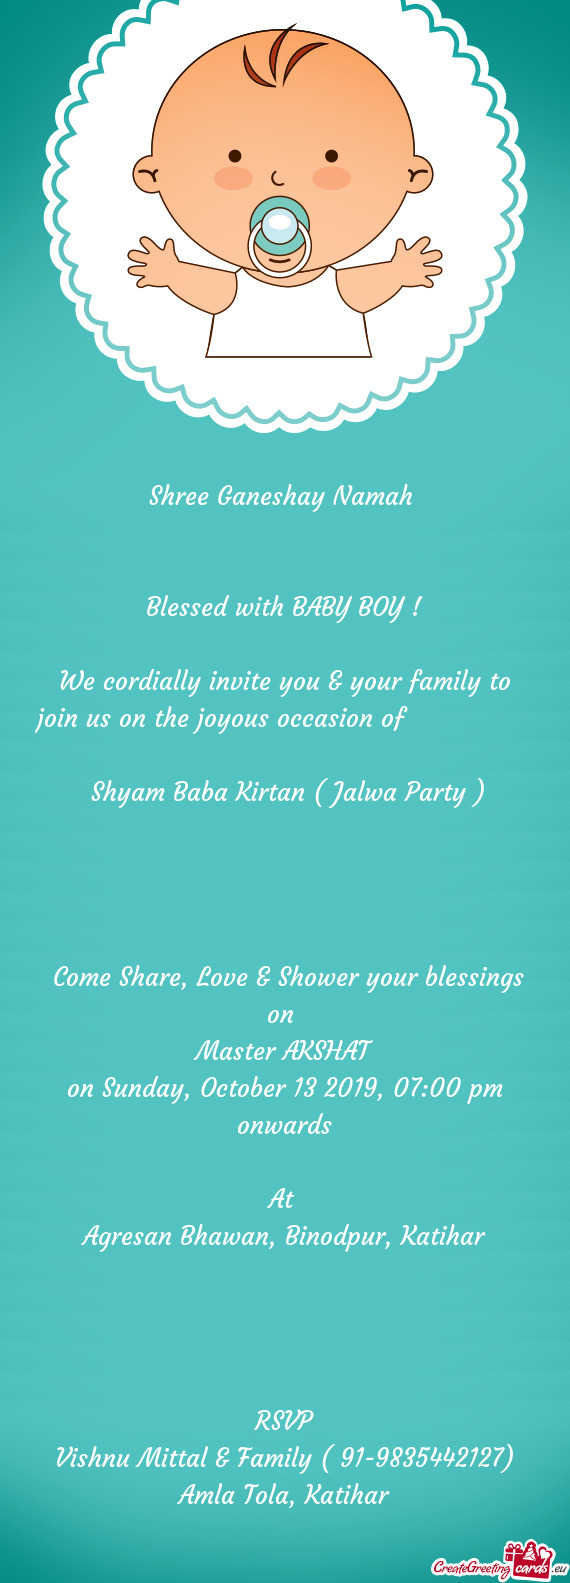 We cordially invite you & your family to join us on the joyous occasion of     Shyam B